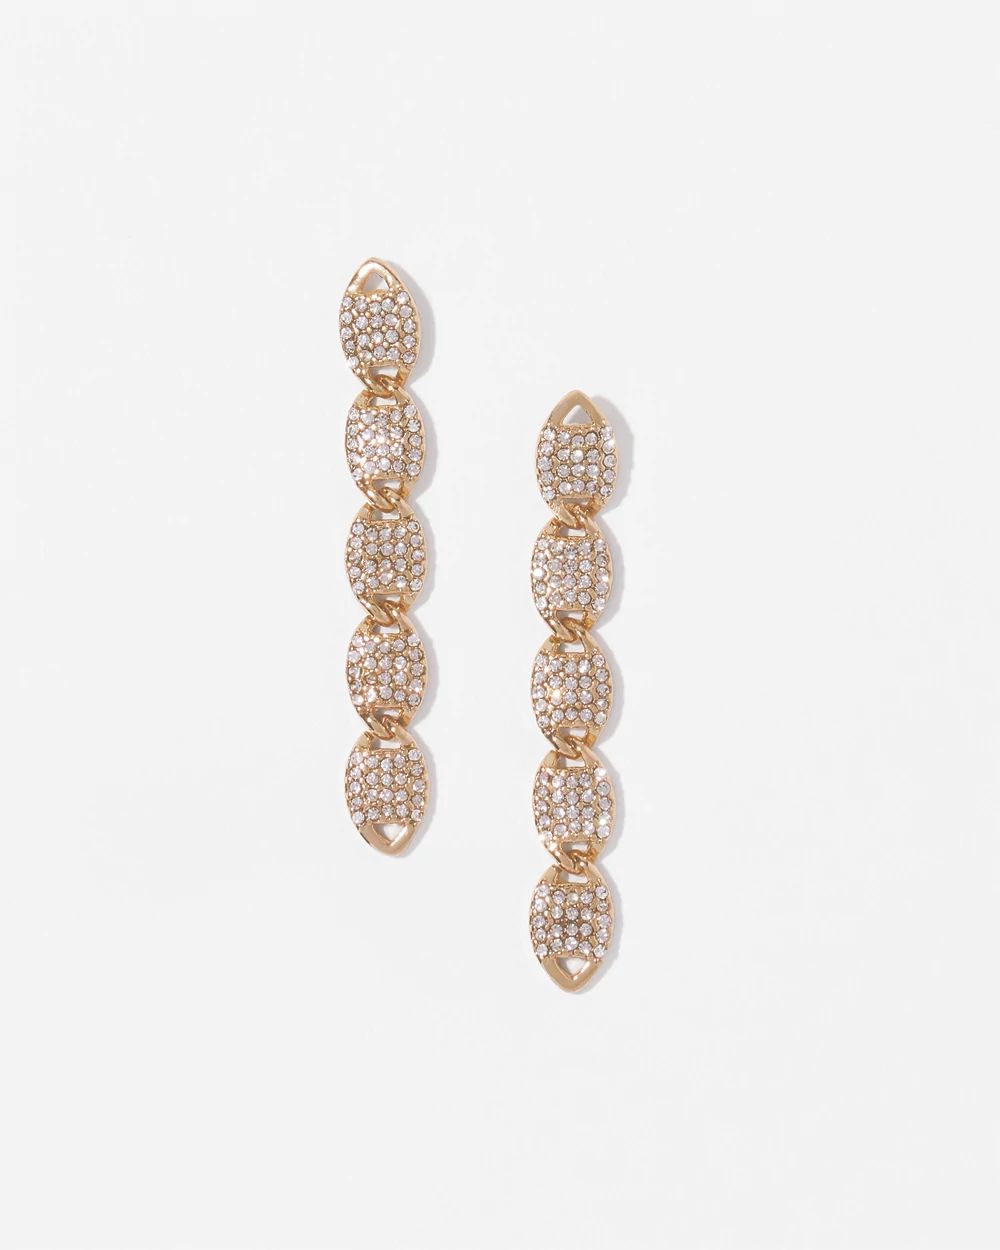 Gold Pave Chain Earrings click to view larger image.